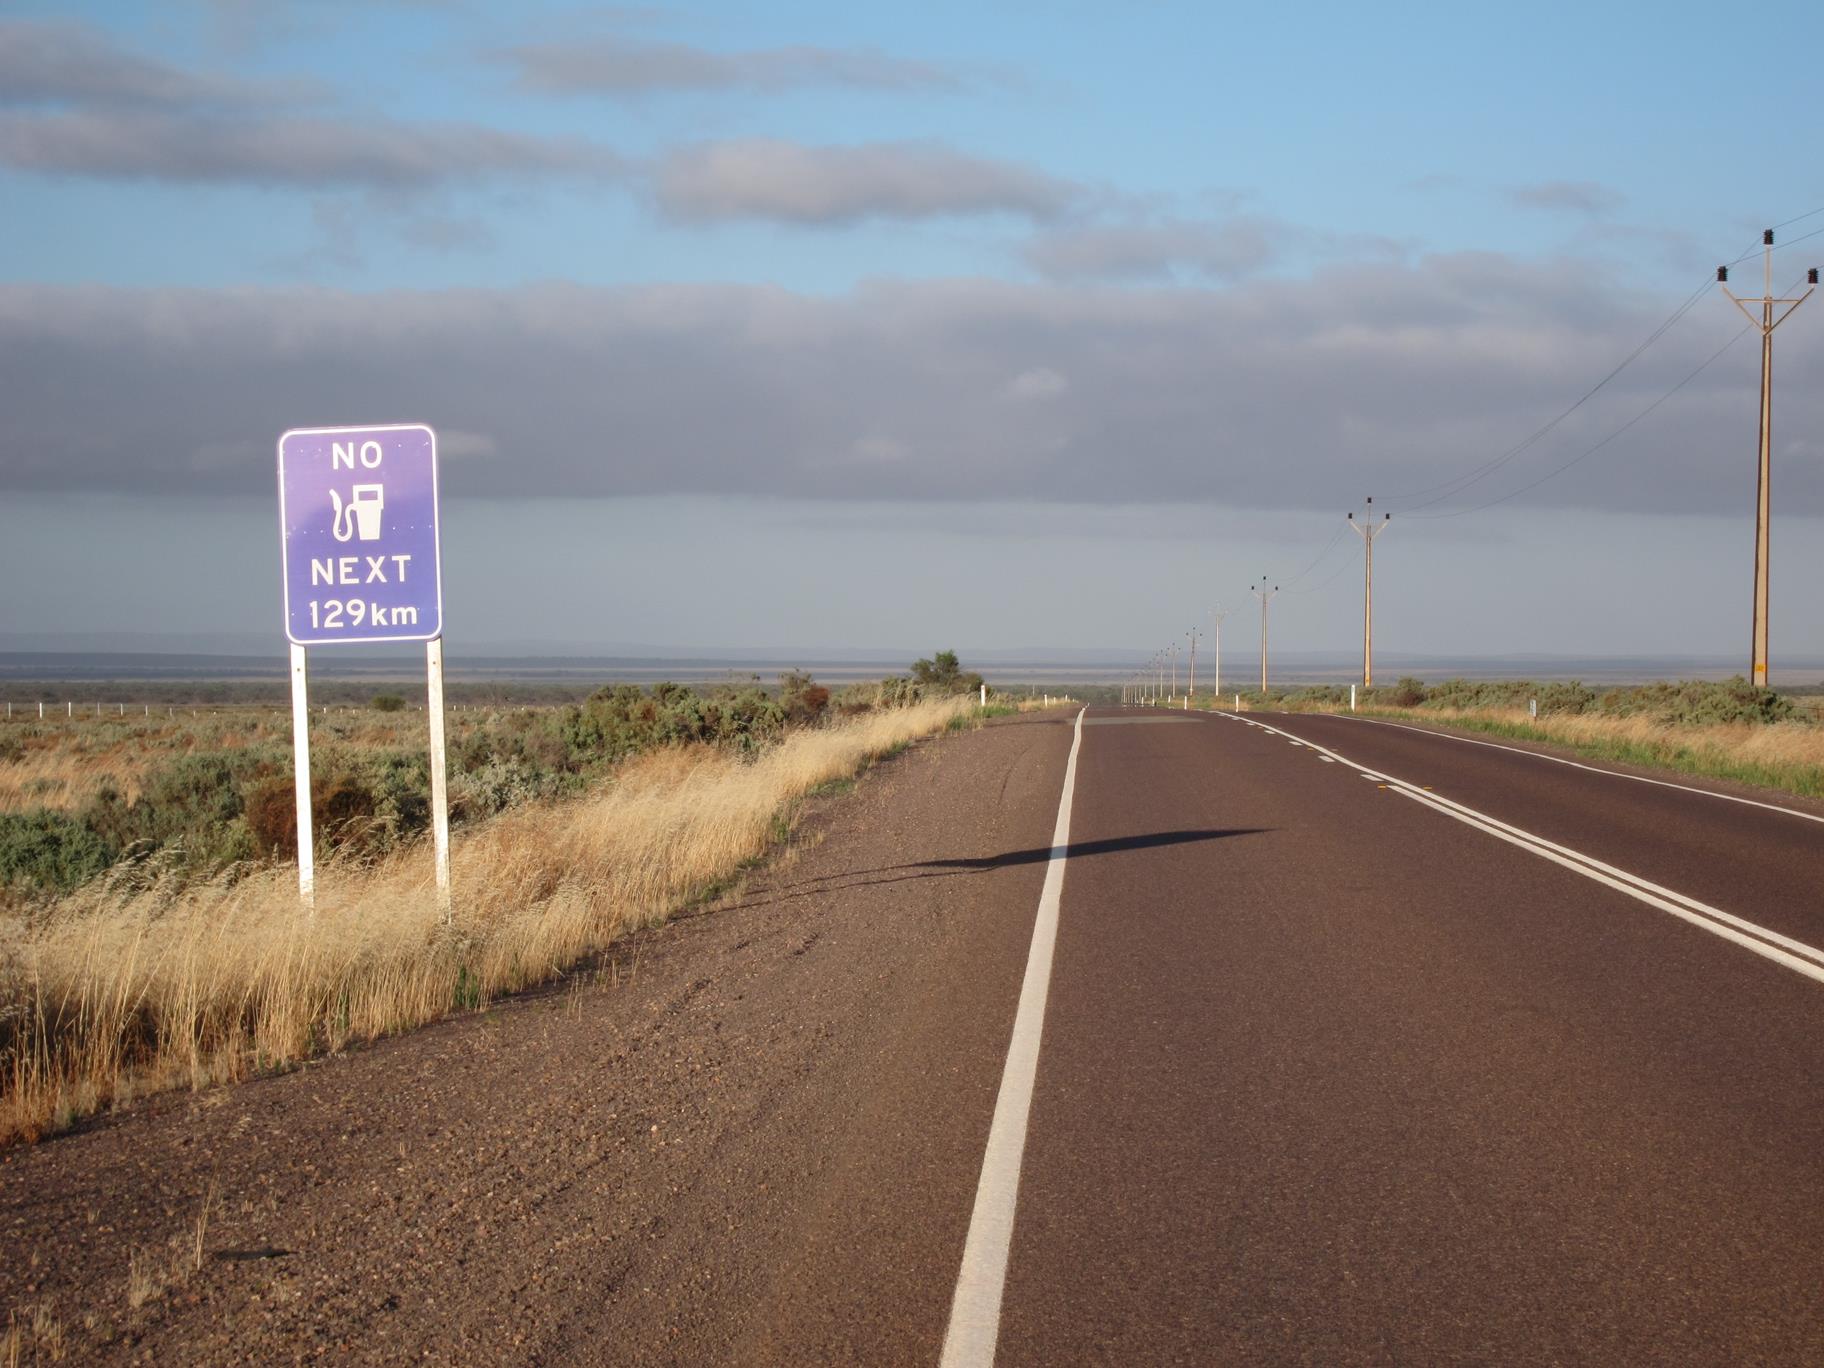 Start of the Eyre highway